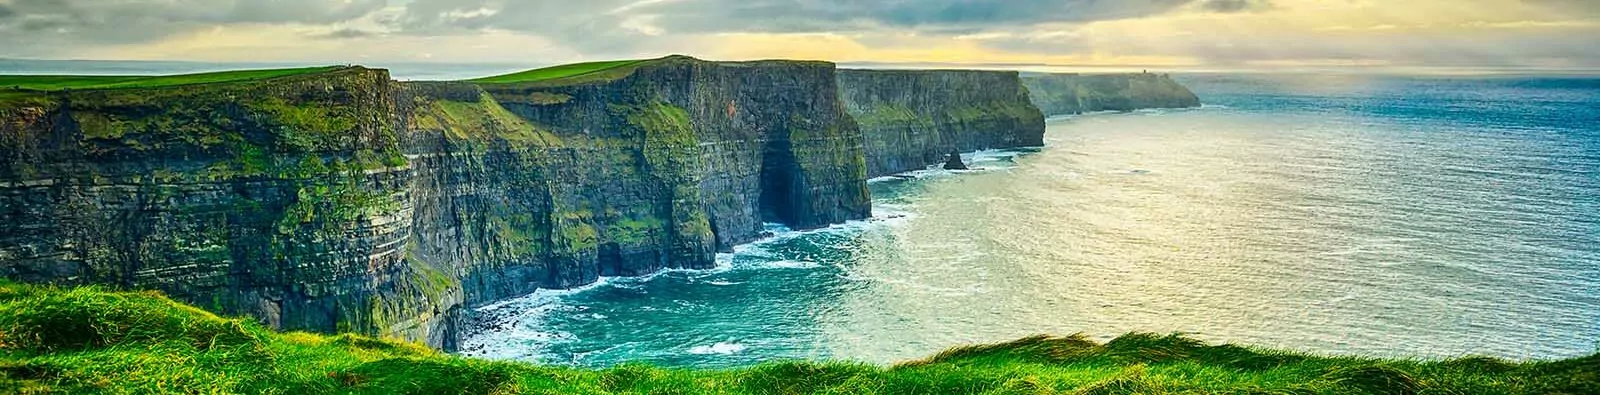 Cliffs of Moher, County Clare, Ireland, The Burren, Europe are one of Ireland's top touristic attractions.